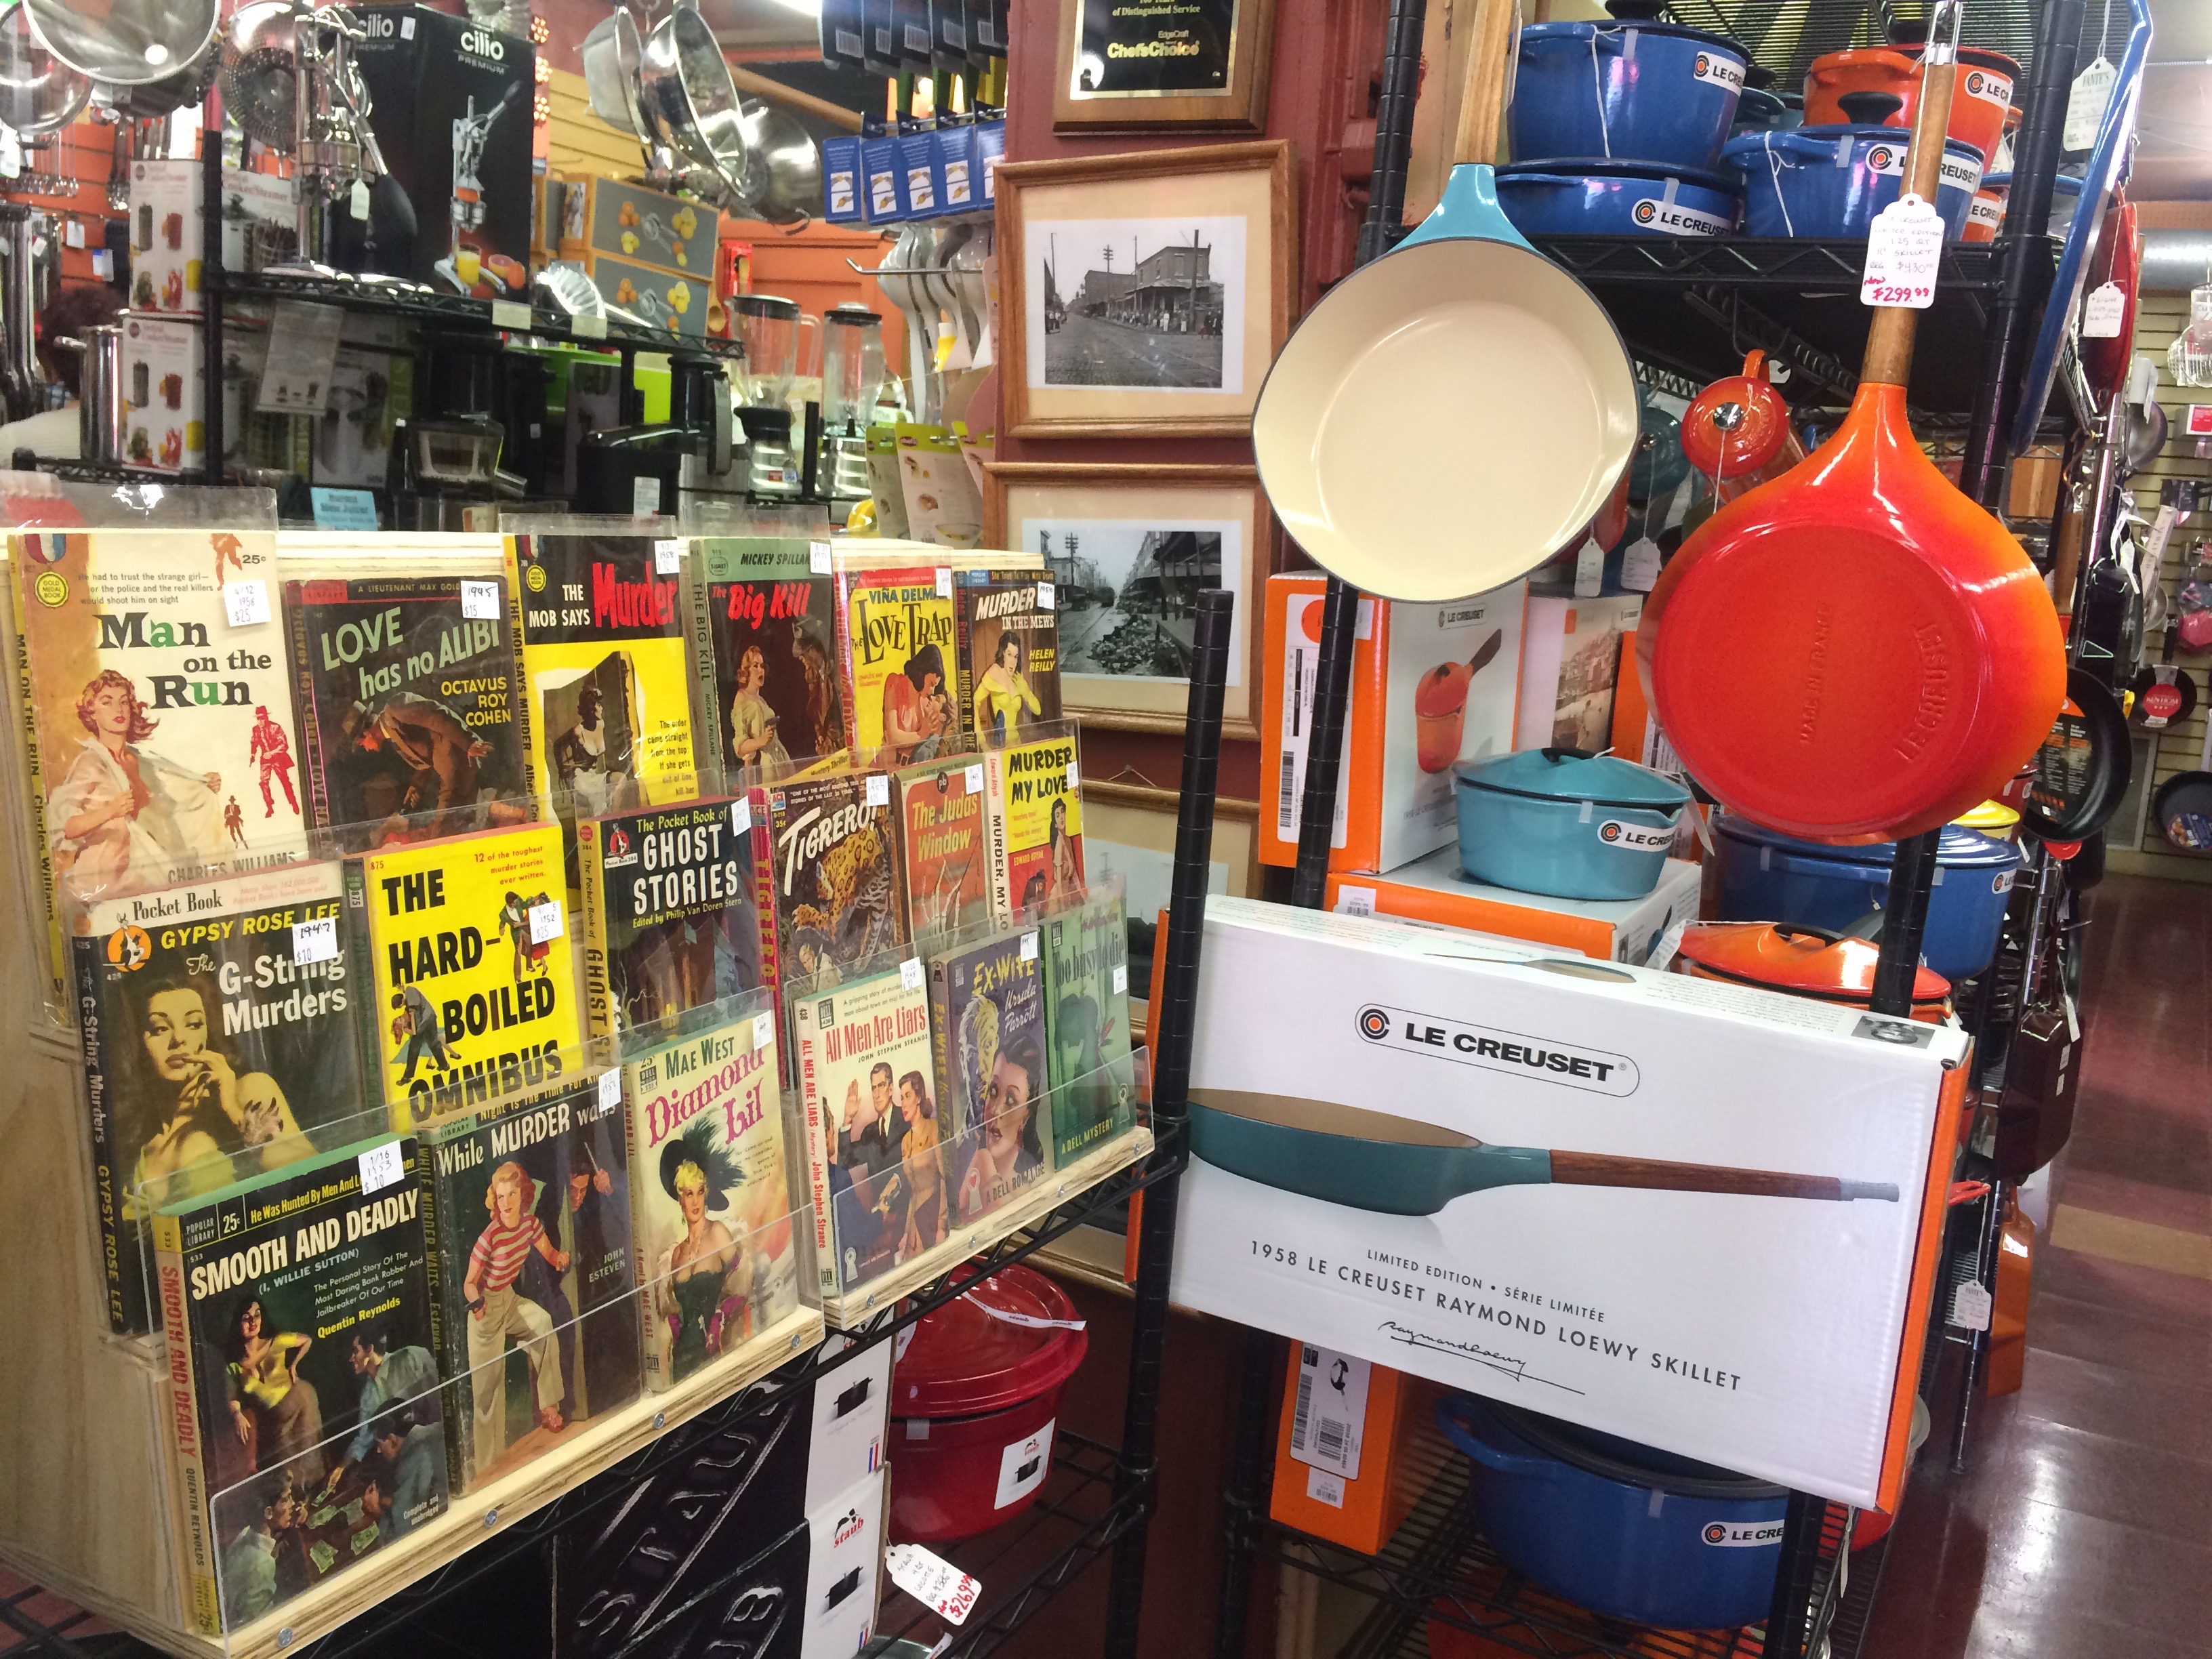 9th Street Stock Exchange: Vintage fiction from Molly’s Books and Records inside Fante’s Kitchen Shop | Catalina Jaramillo